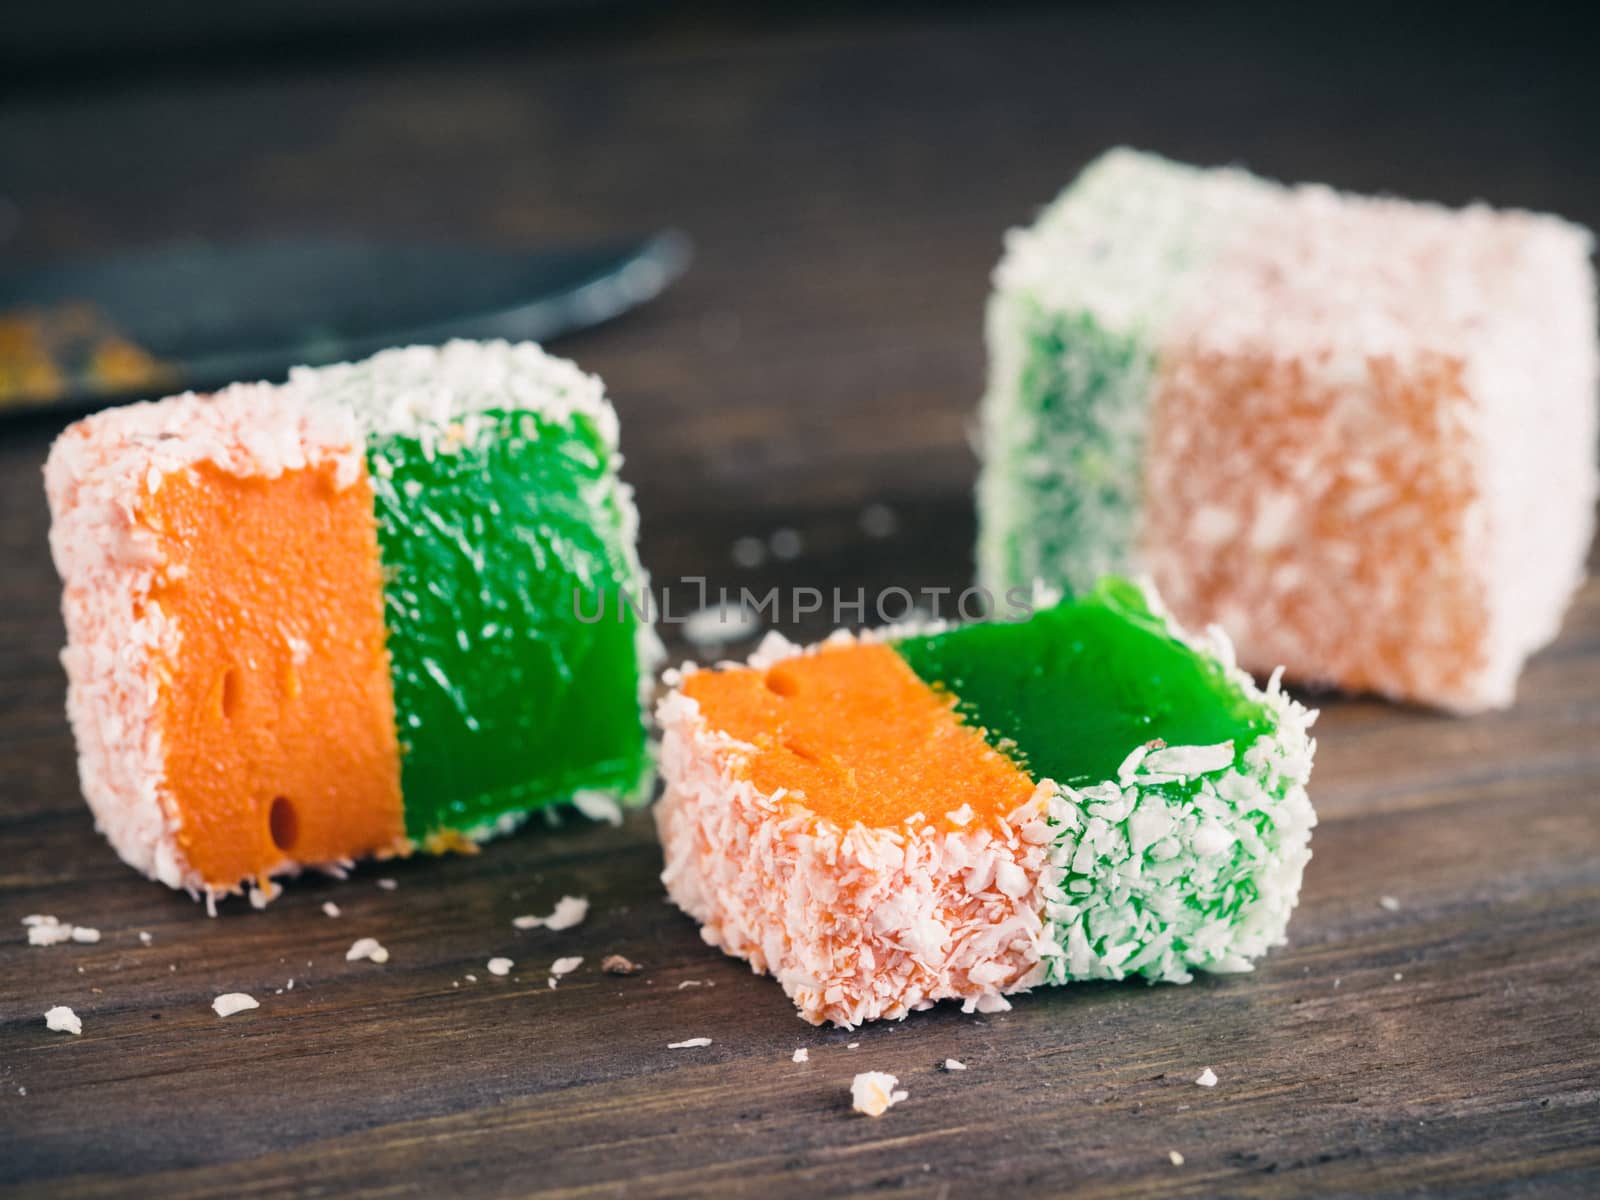 Extreme closeup view of slice of turkish delight. Selective focus.